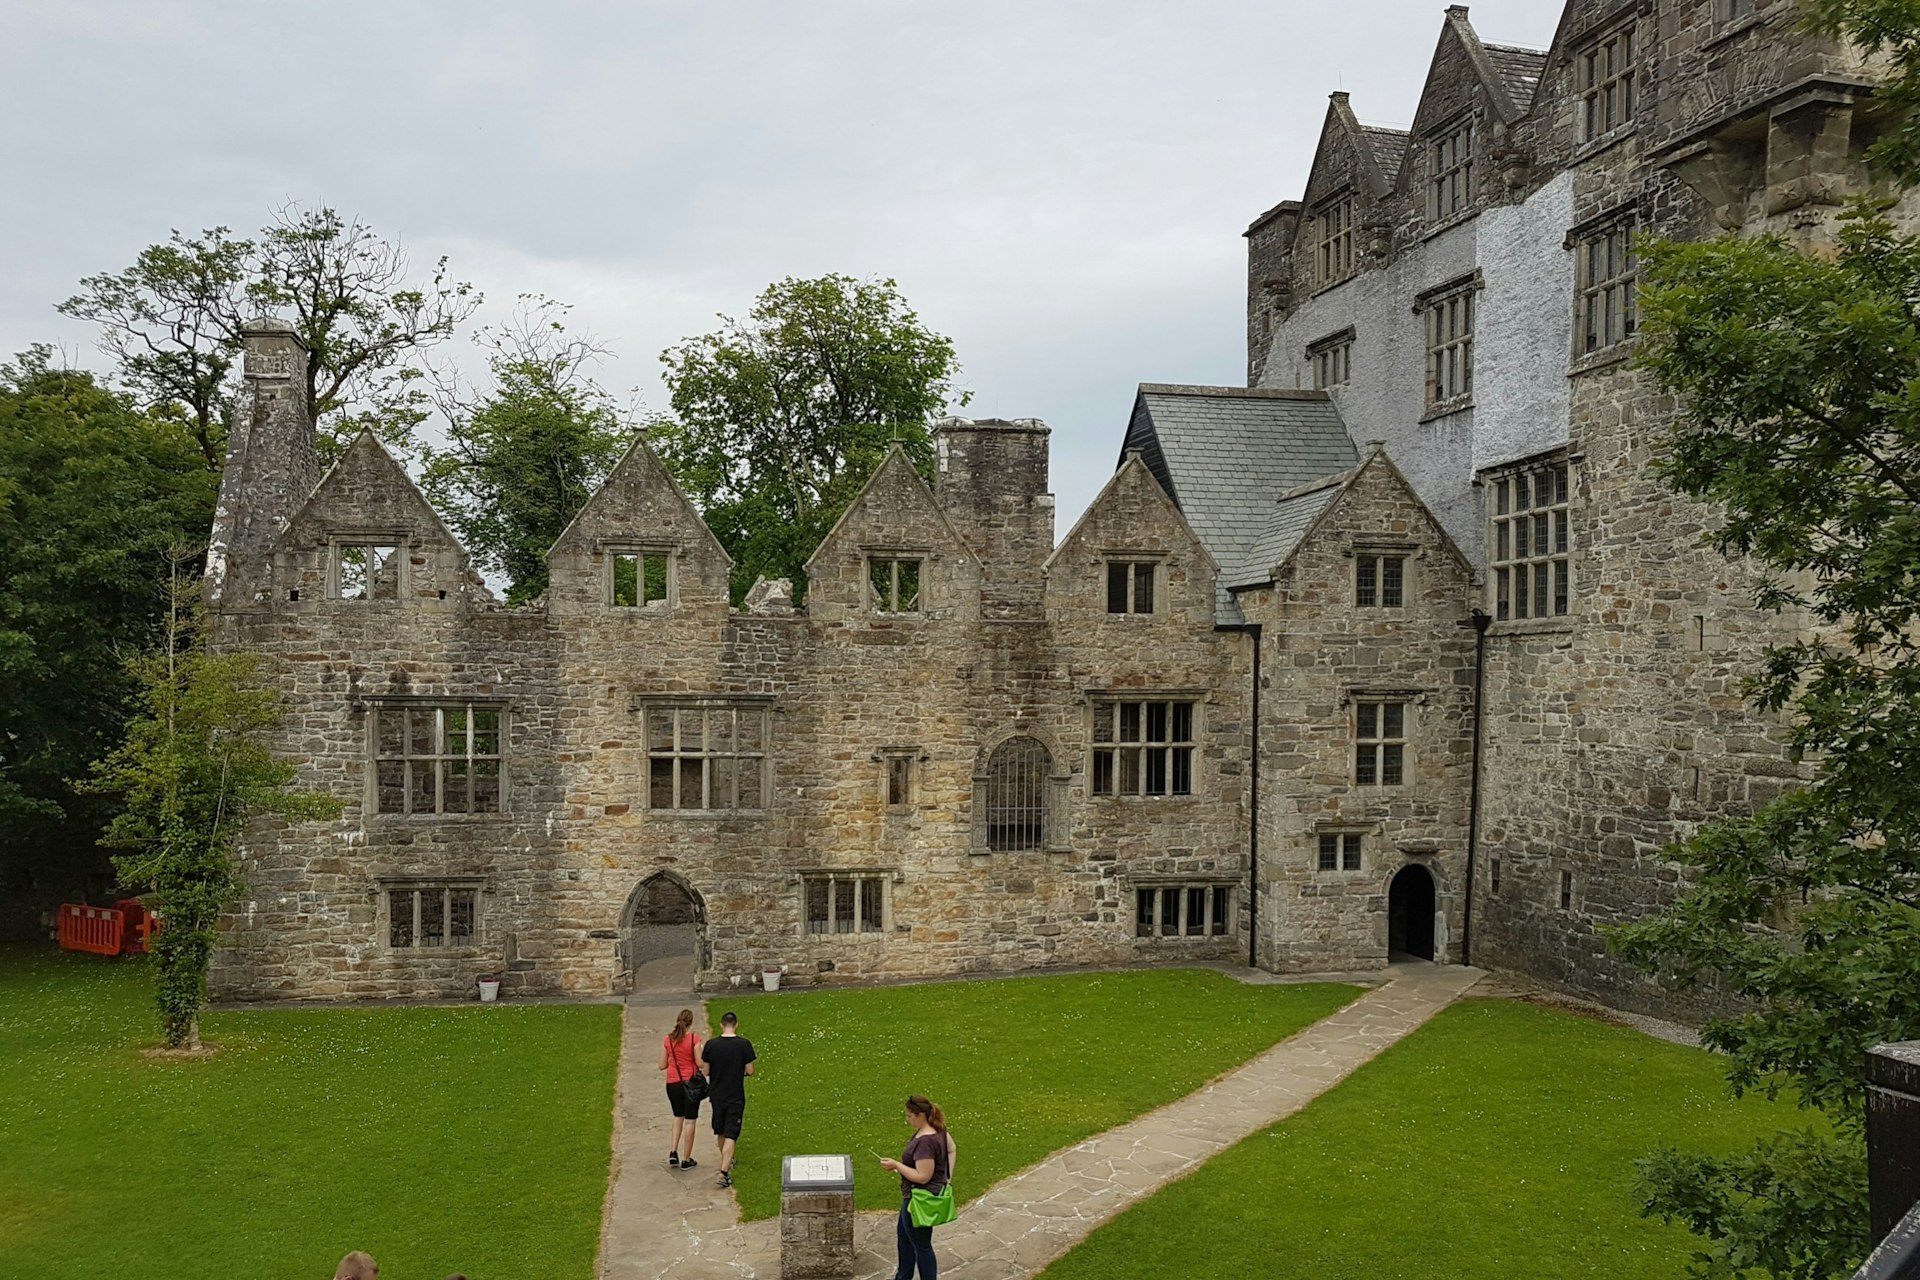 The exterior of Donegal Castle in Ireland